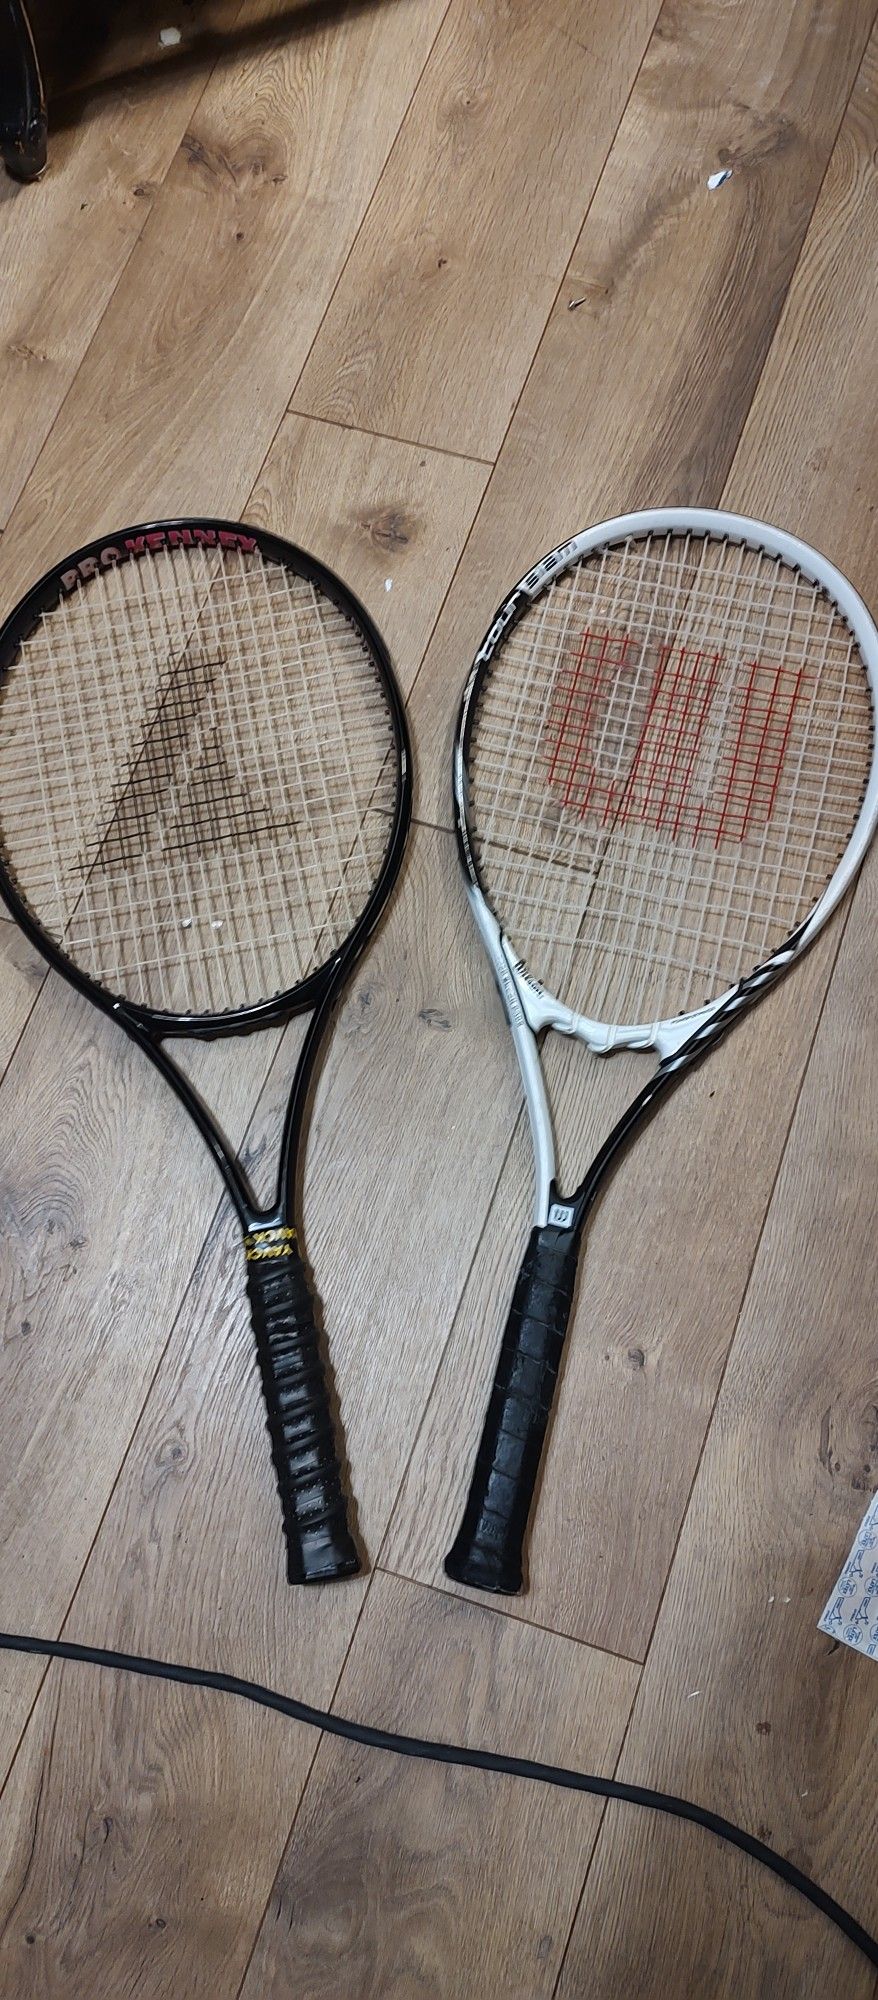 Porch Pickup Tennis Racquets 2 For $25